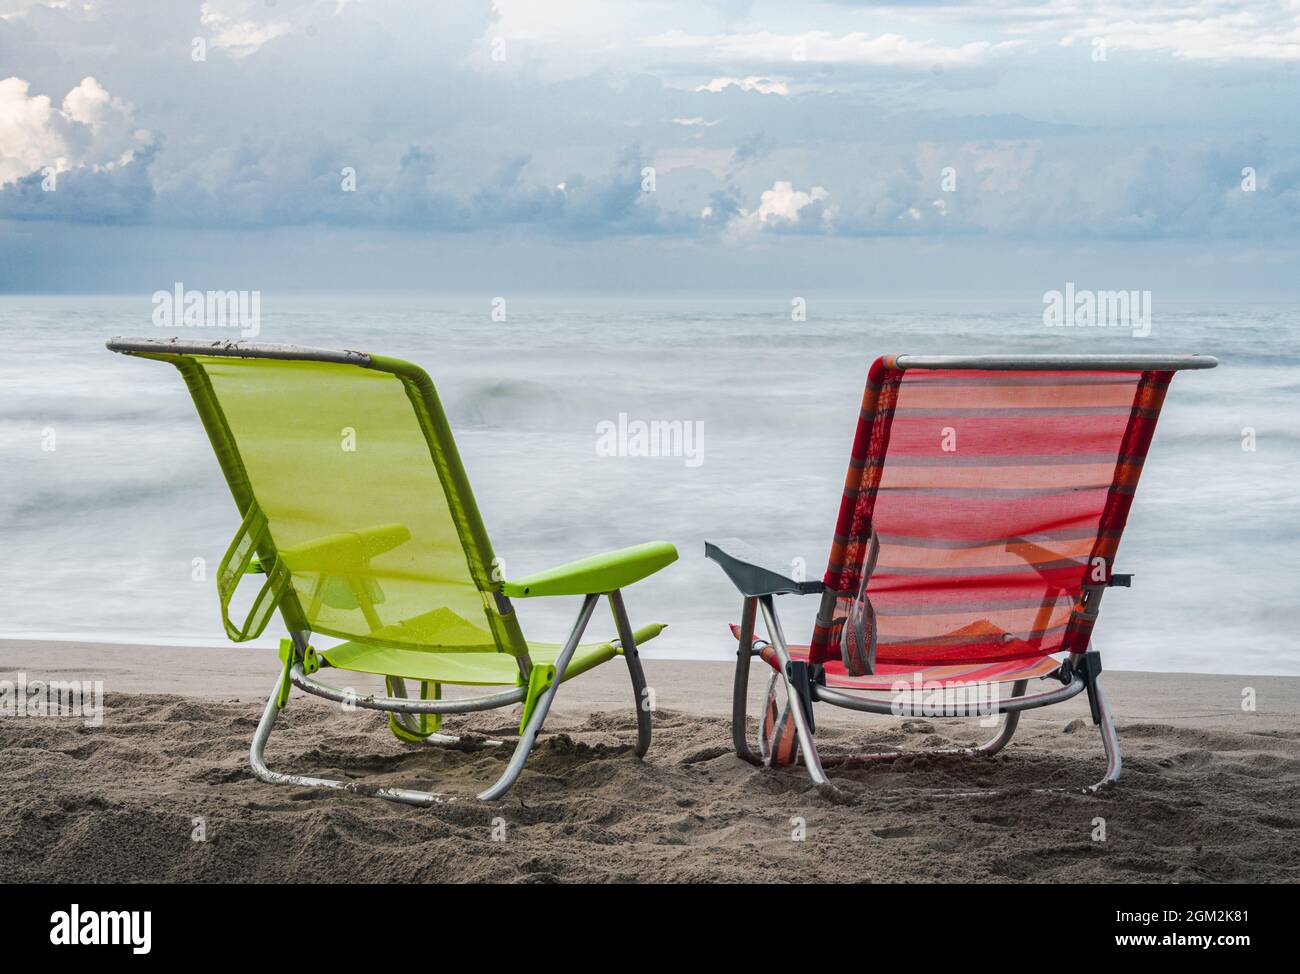 Folding chairs at a sand beach Stock Photo